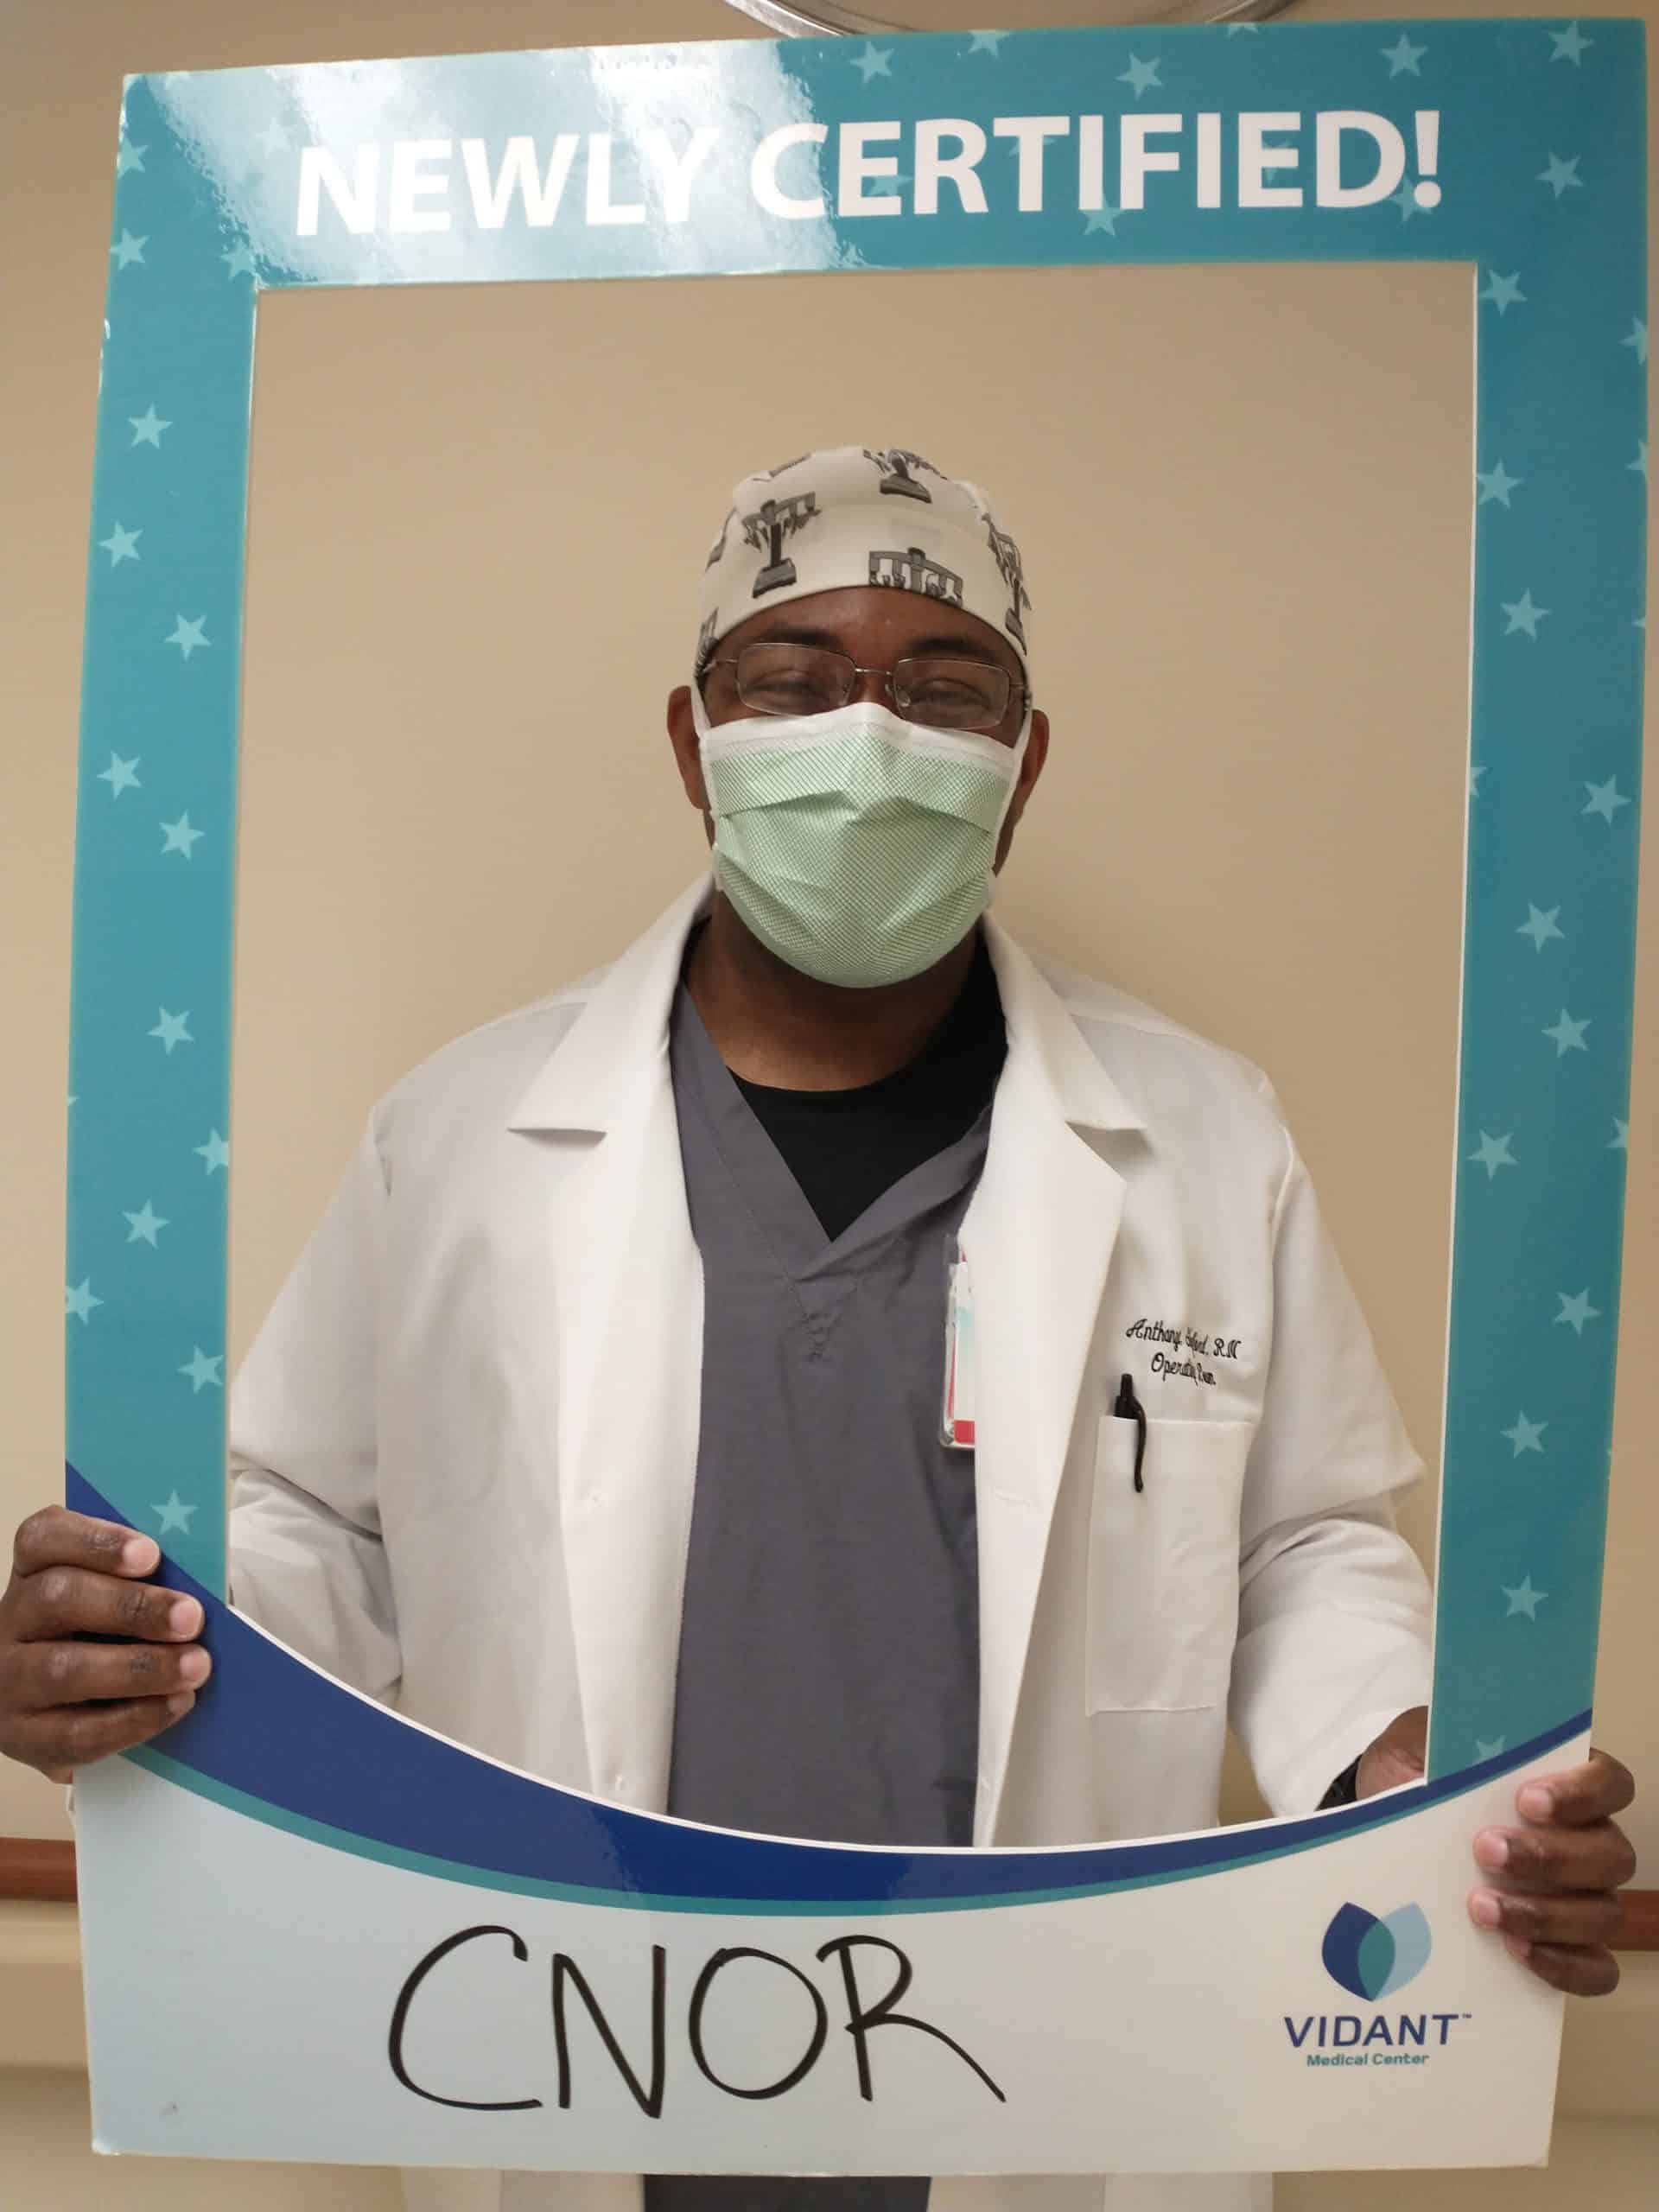 Anthony Shuford RN, CNOR, works in the operating room and received his certified nurse of OR certifications